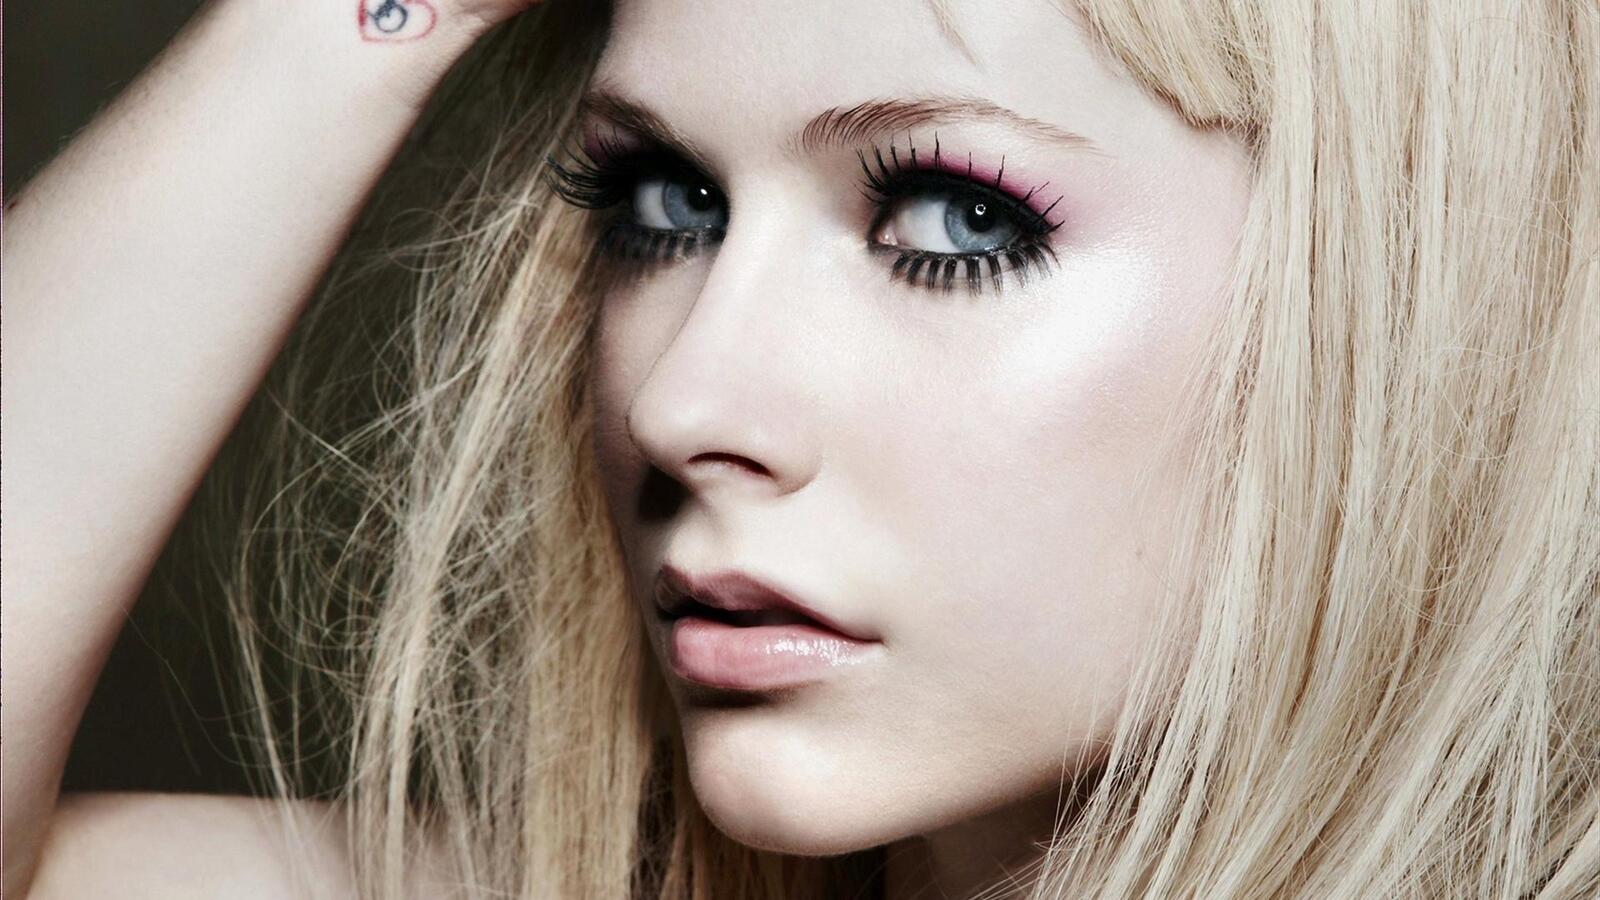 Wallpapers lady a woman Avril Lavigne on the desktop